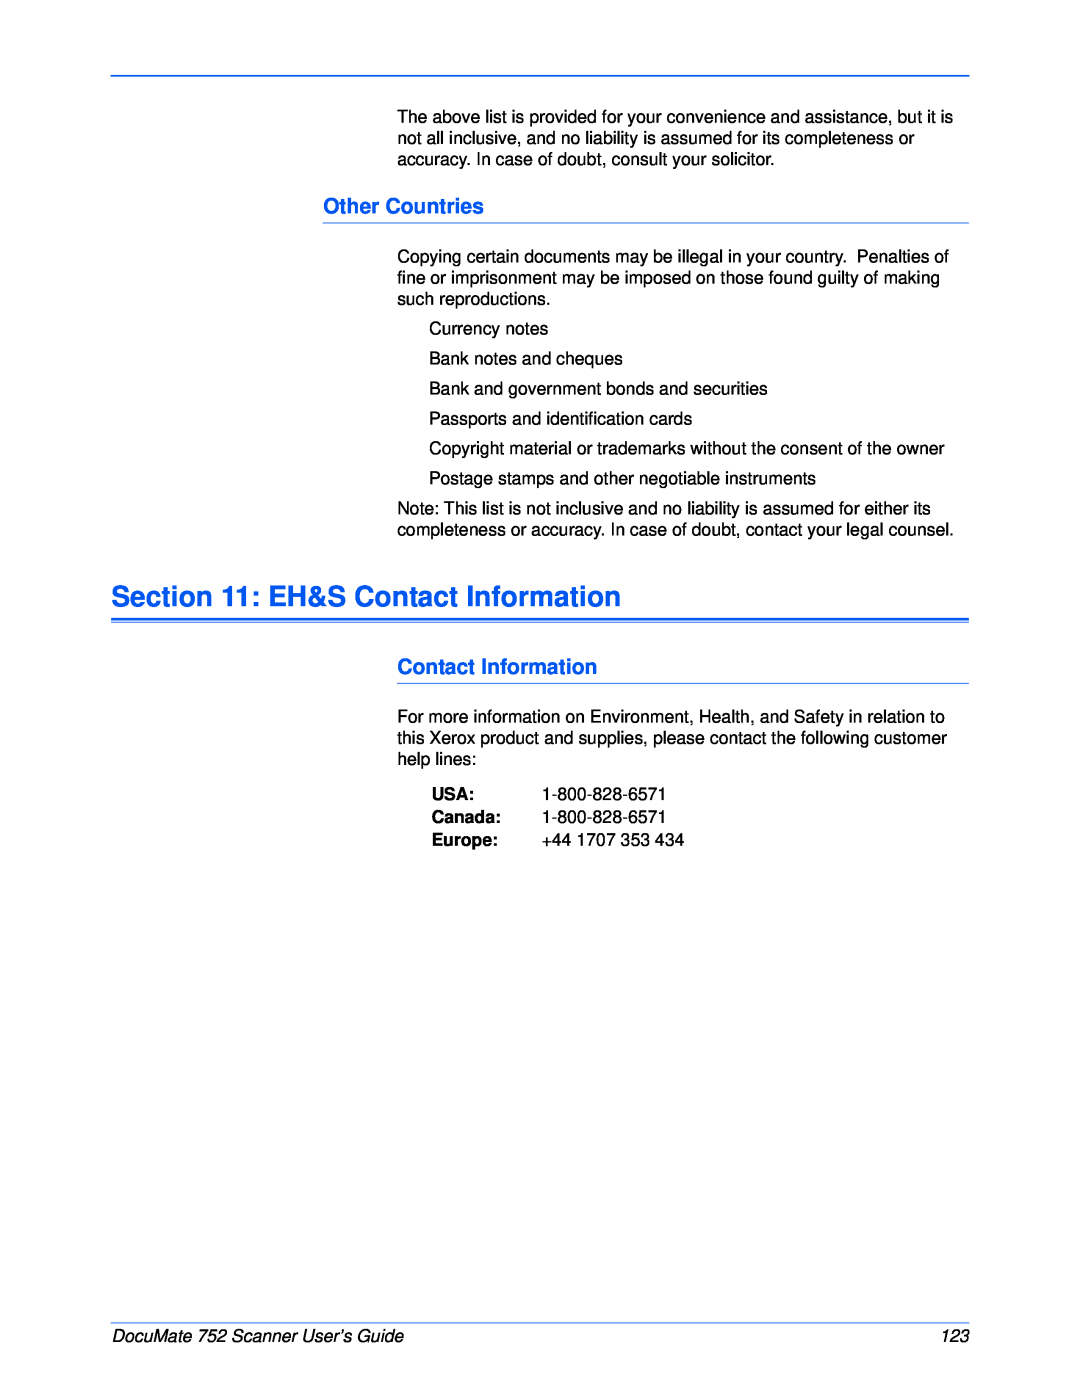 Xerox manual EH&S Contact Information, Other Countries, DocuMate 752 Scanner User’s Guide 